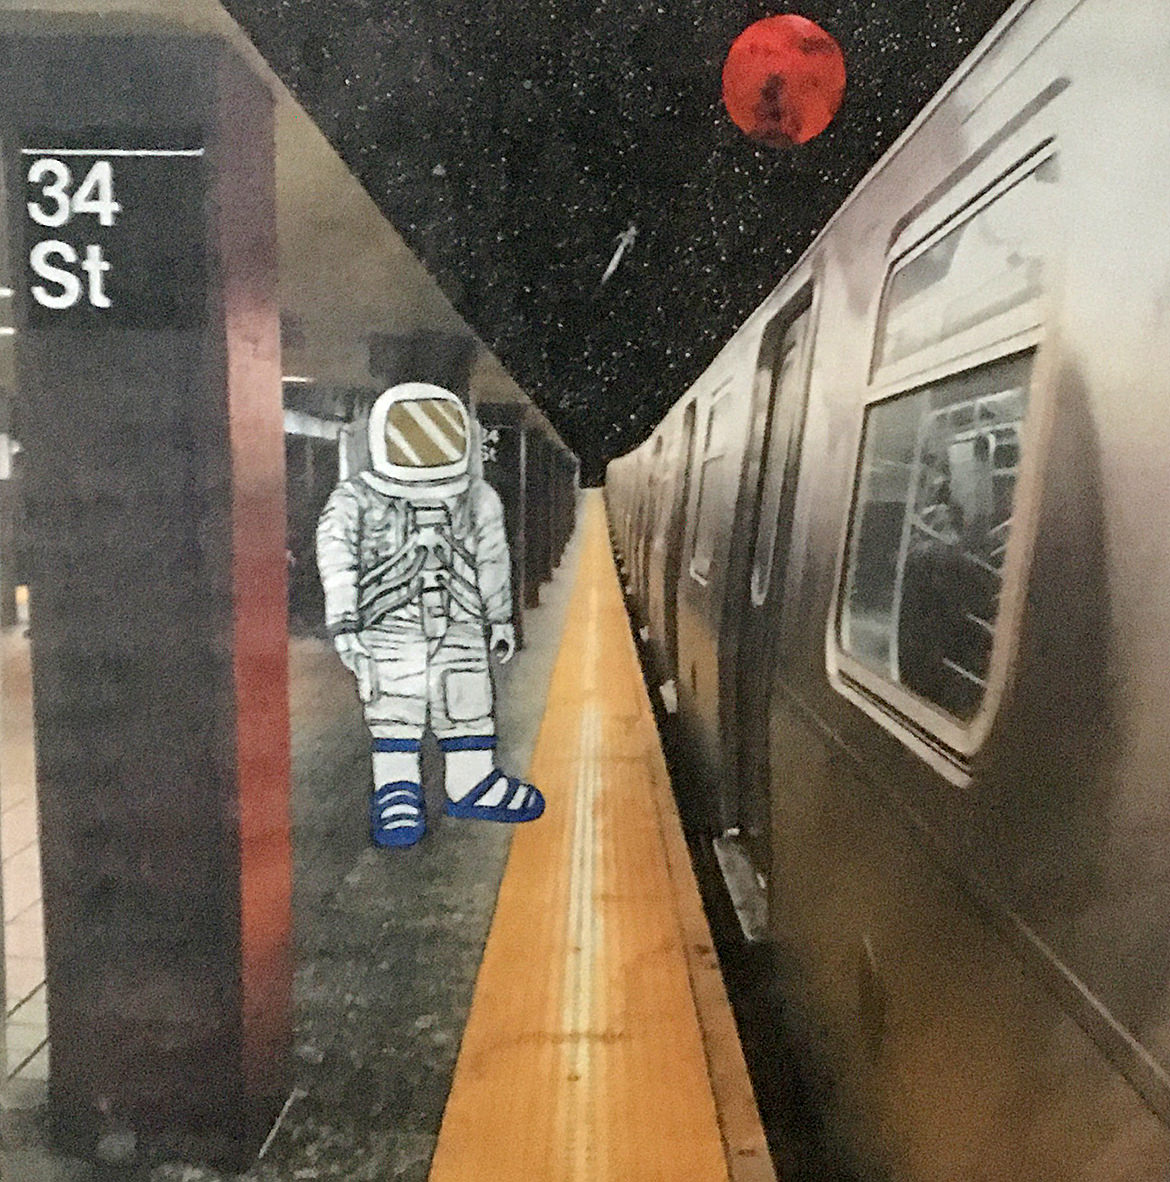 A sticker illustration of an astronaut commuter stands on the 34th Street subway platform